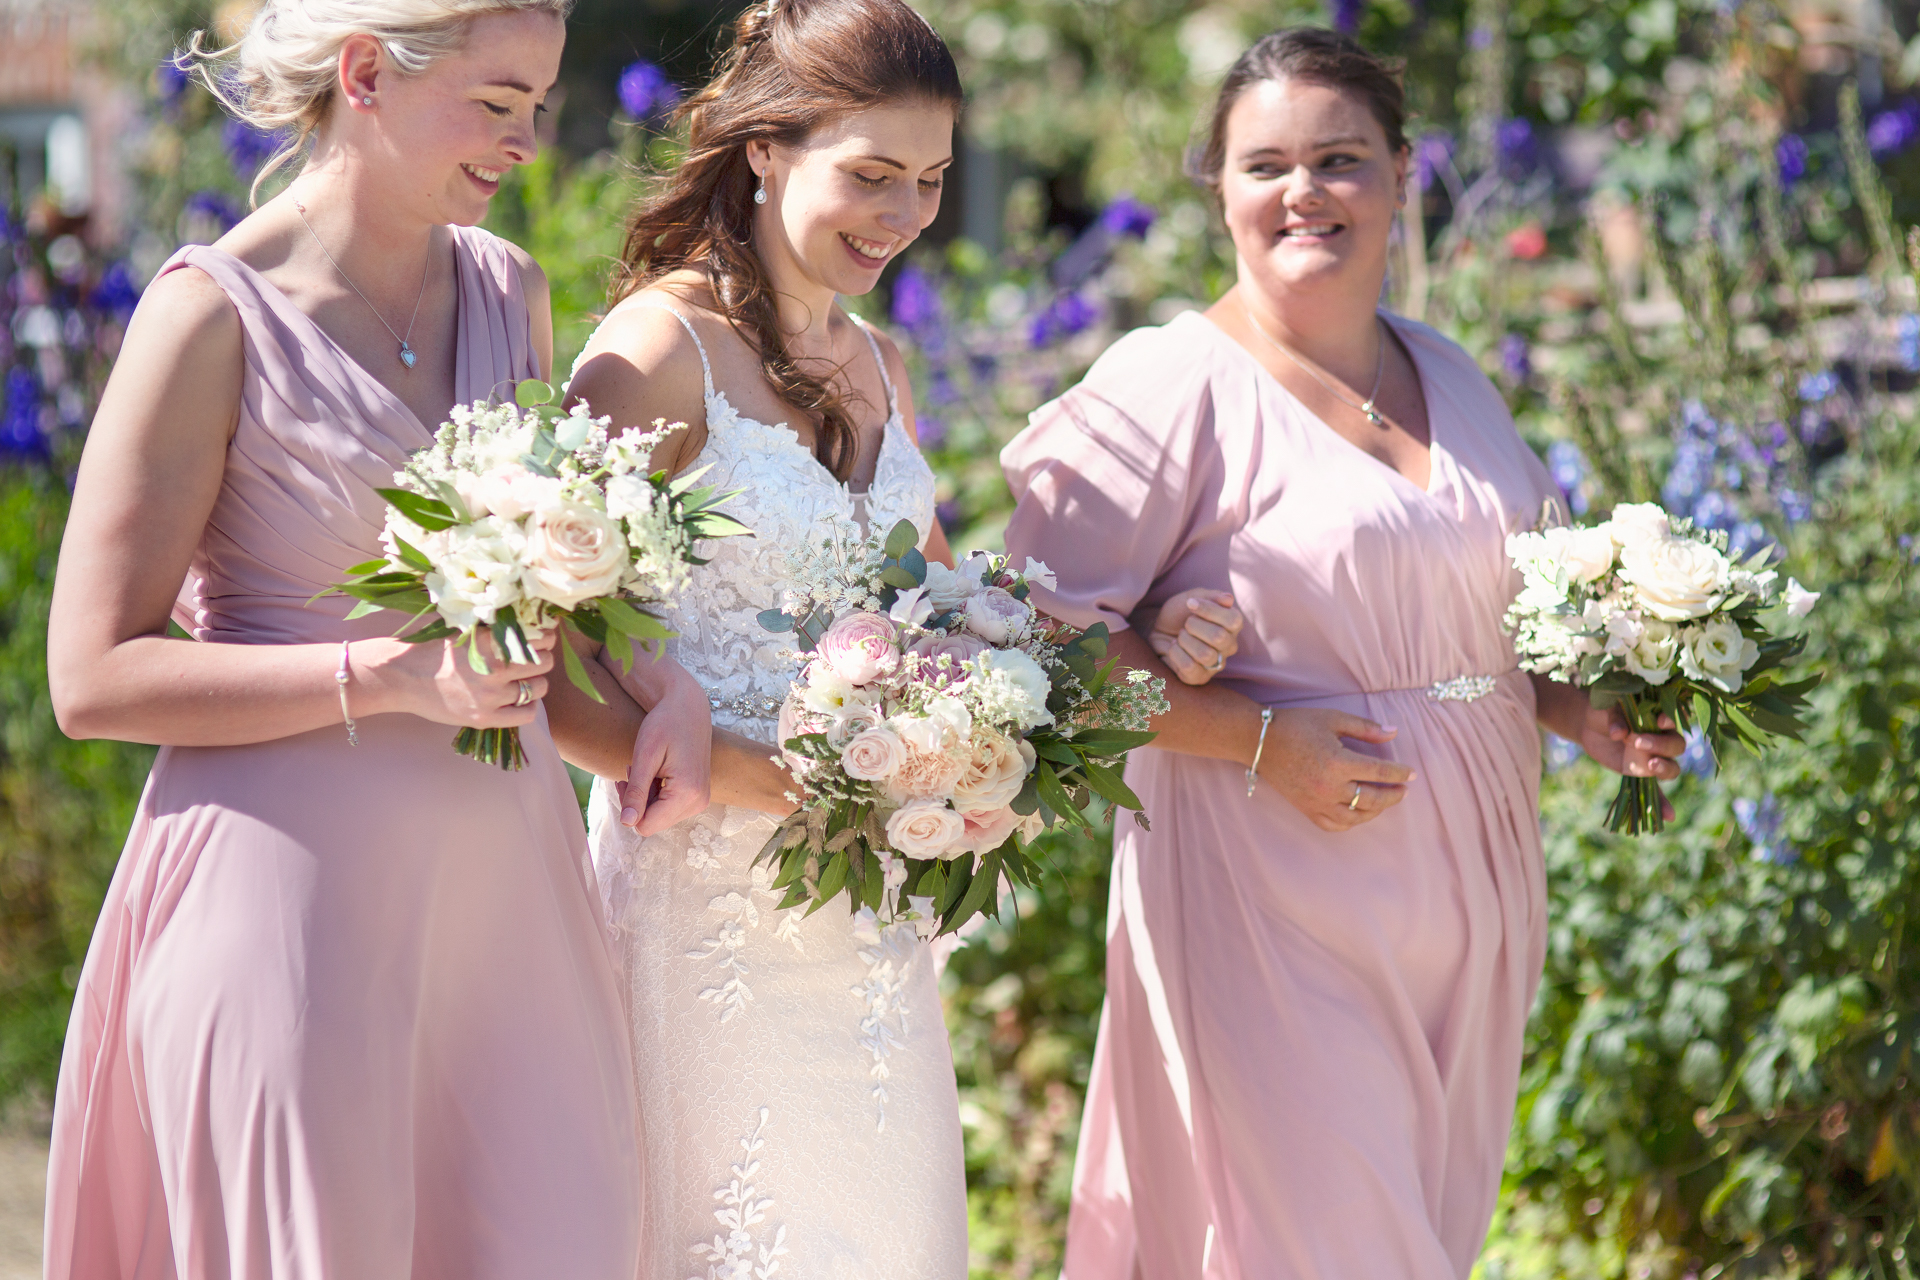 Modern & romantic wedding photography at Upwaltham Barns in Chichester